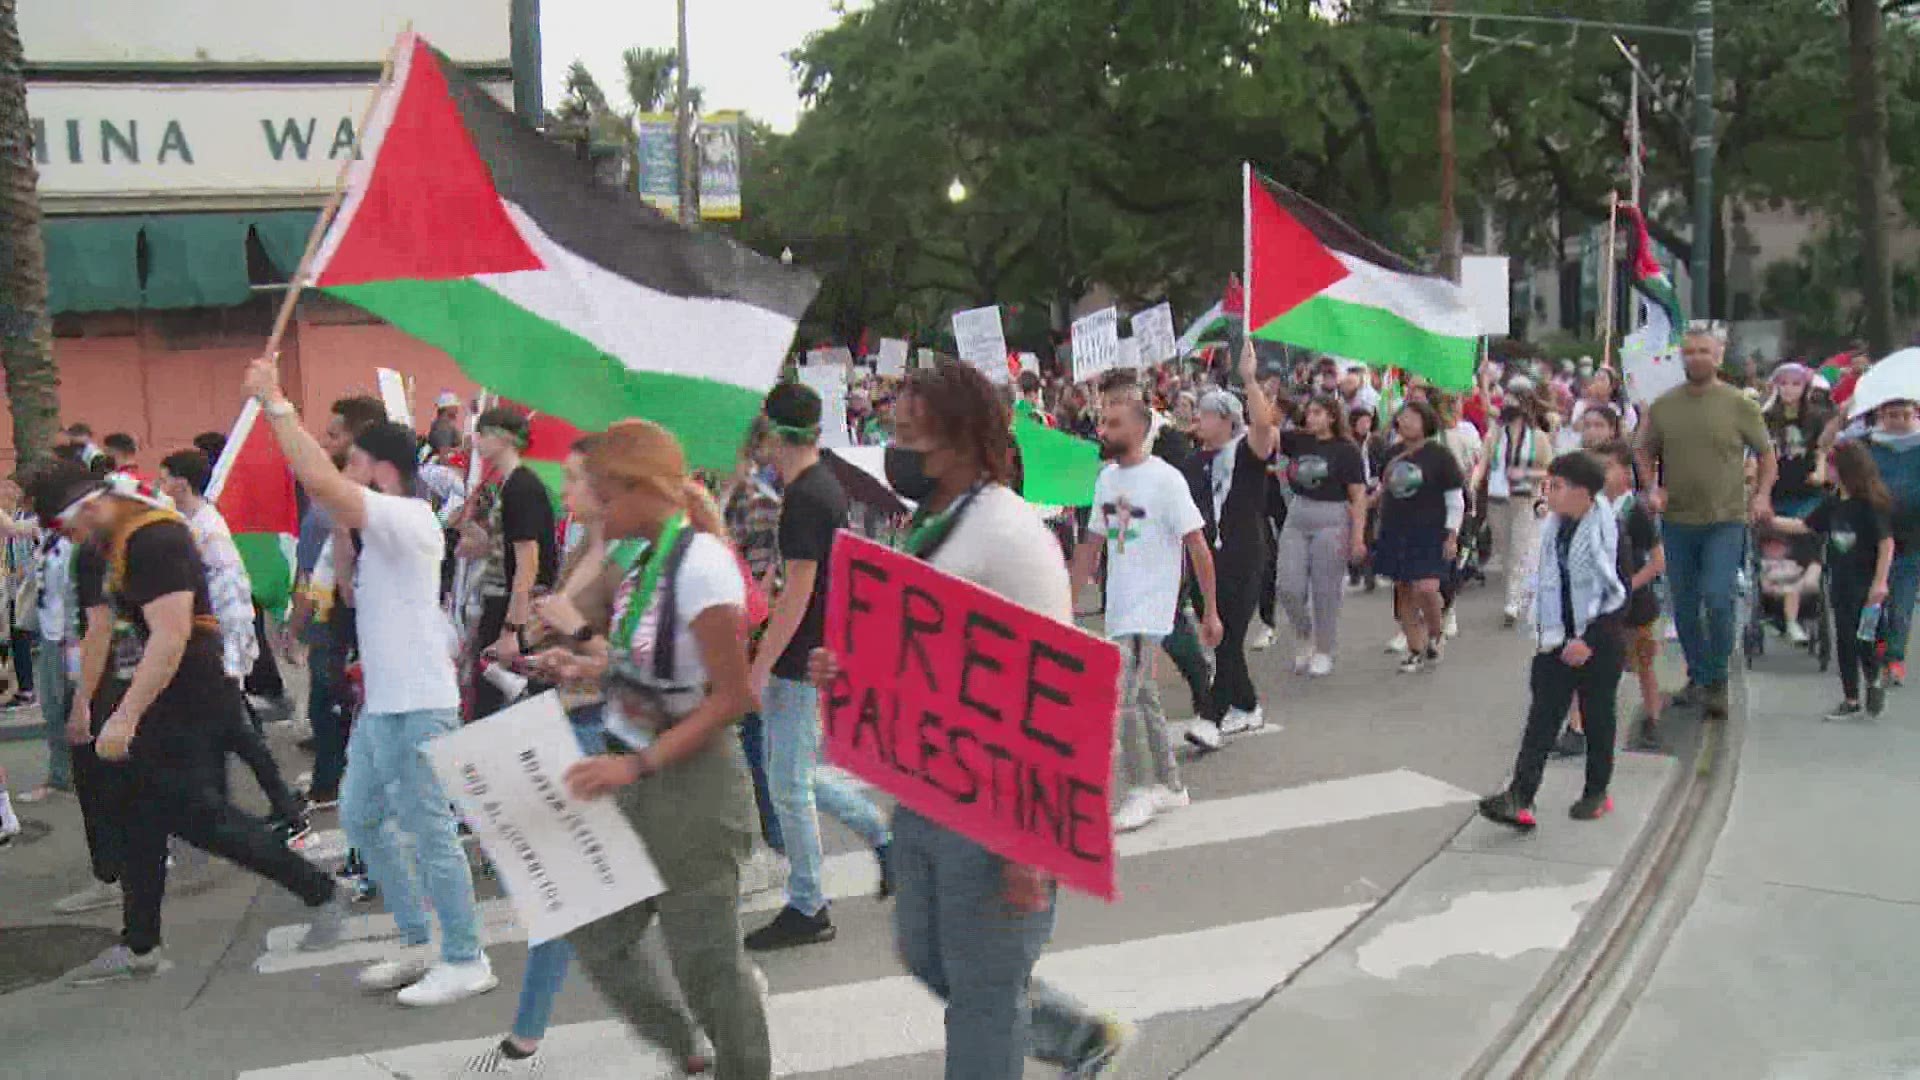 Several hundred people attended the rally, including a large presence of Palestinian-Americans.